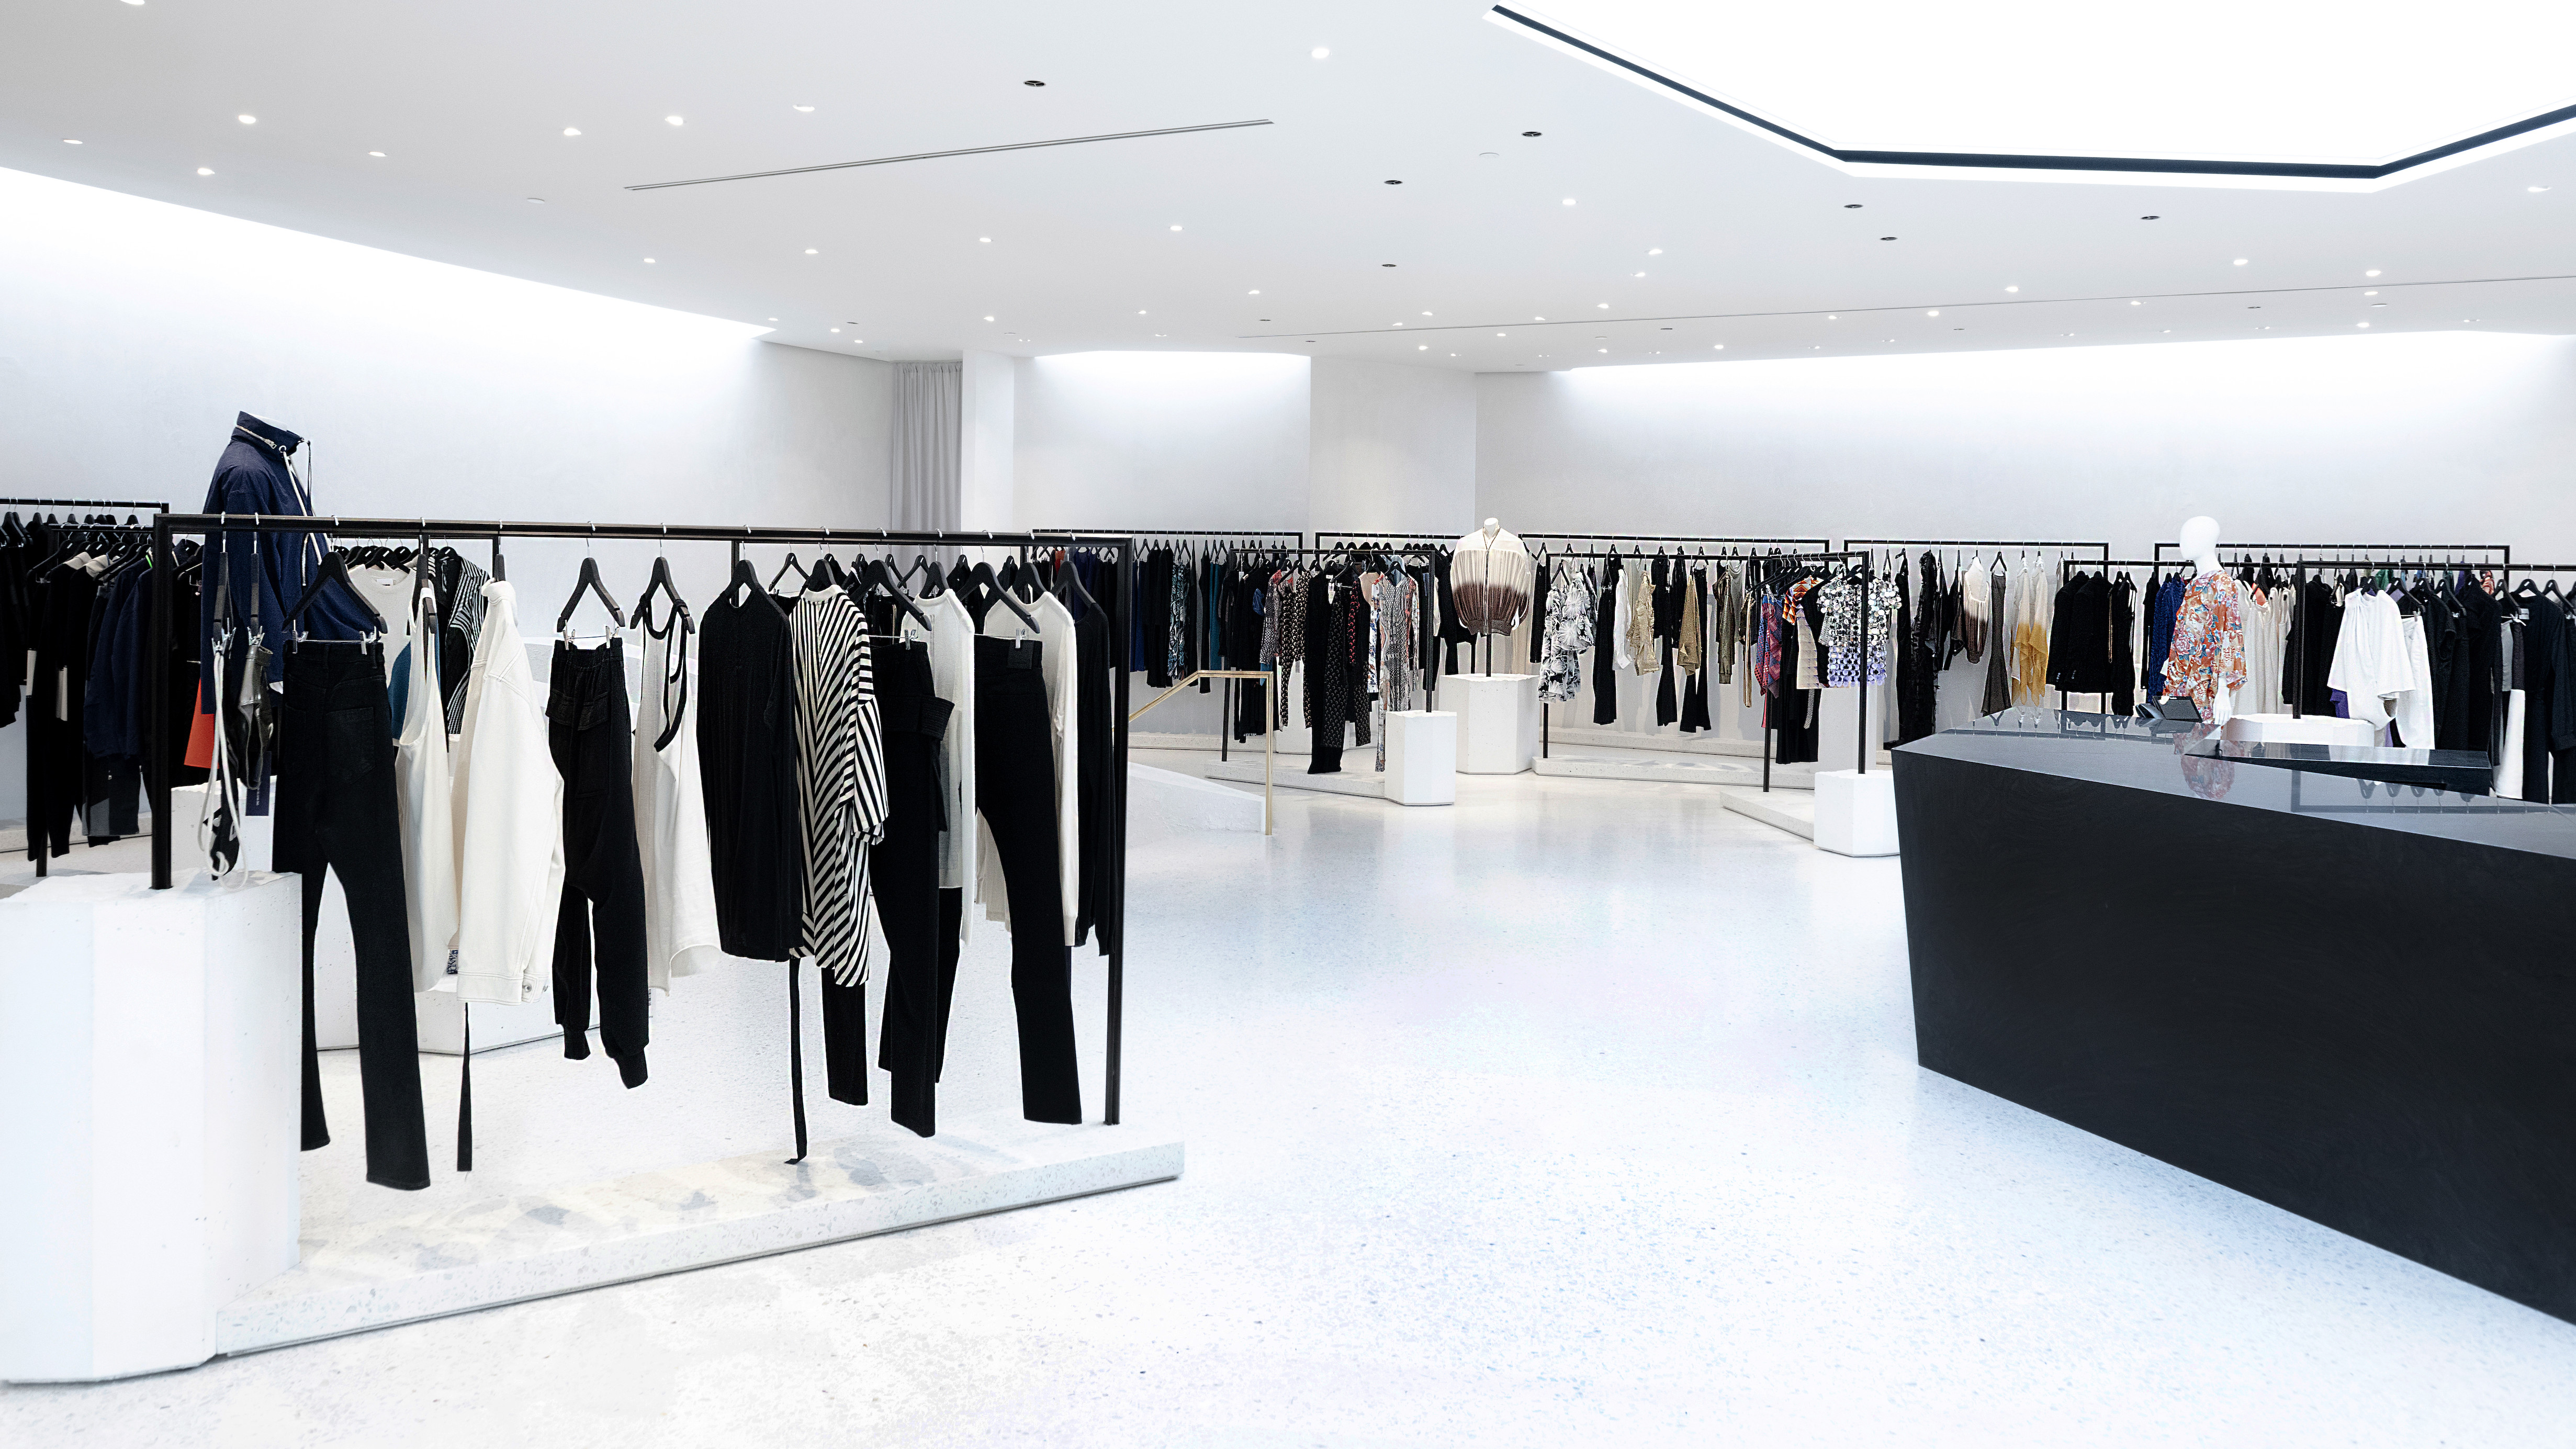 Barneys. Neiman Marcus. America's stores are taking the leap into